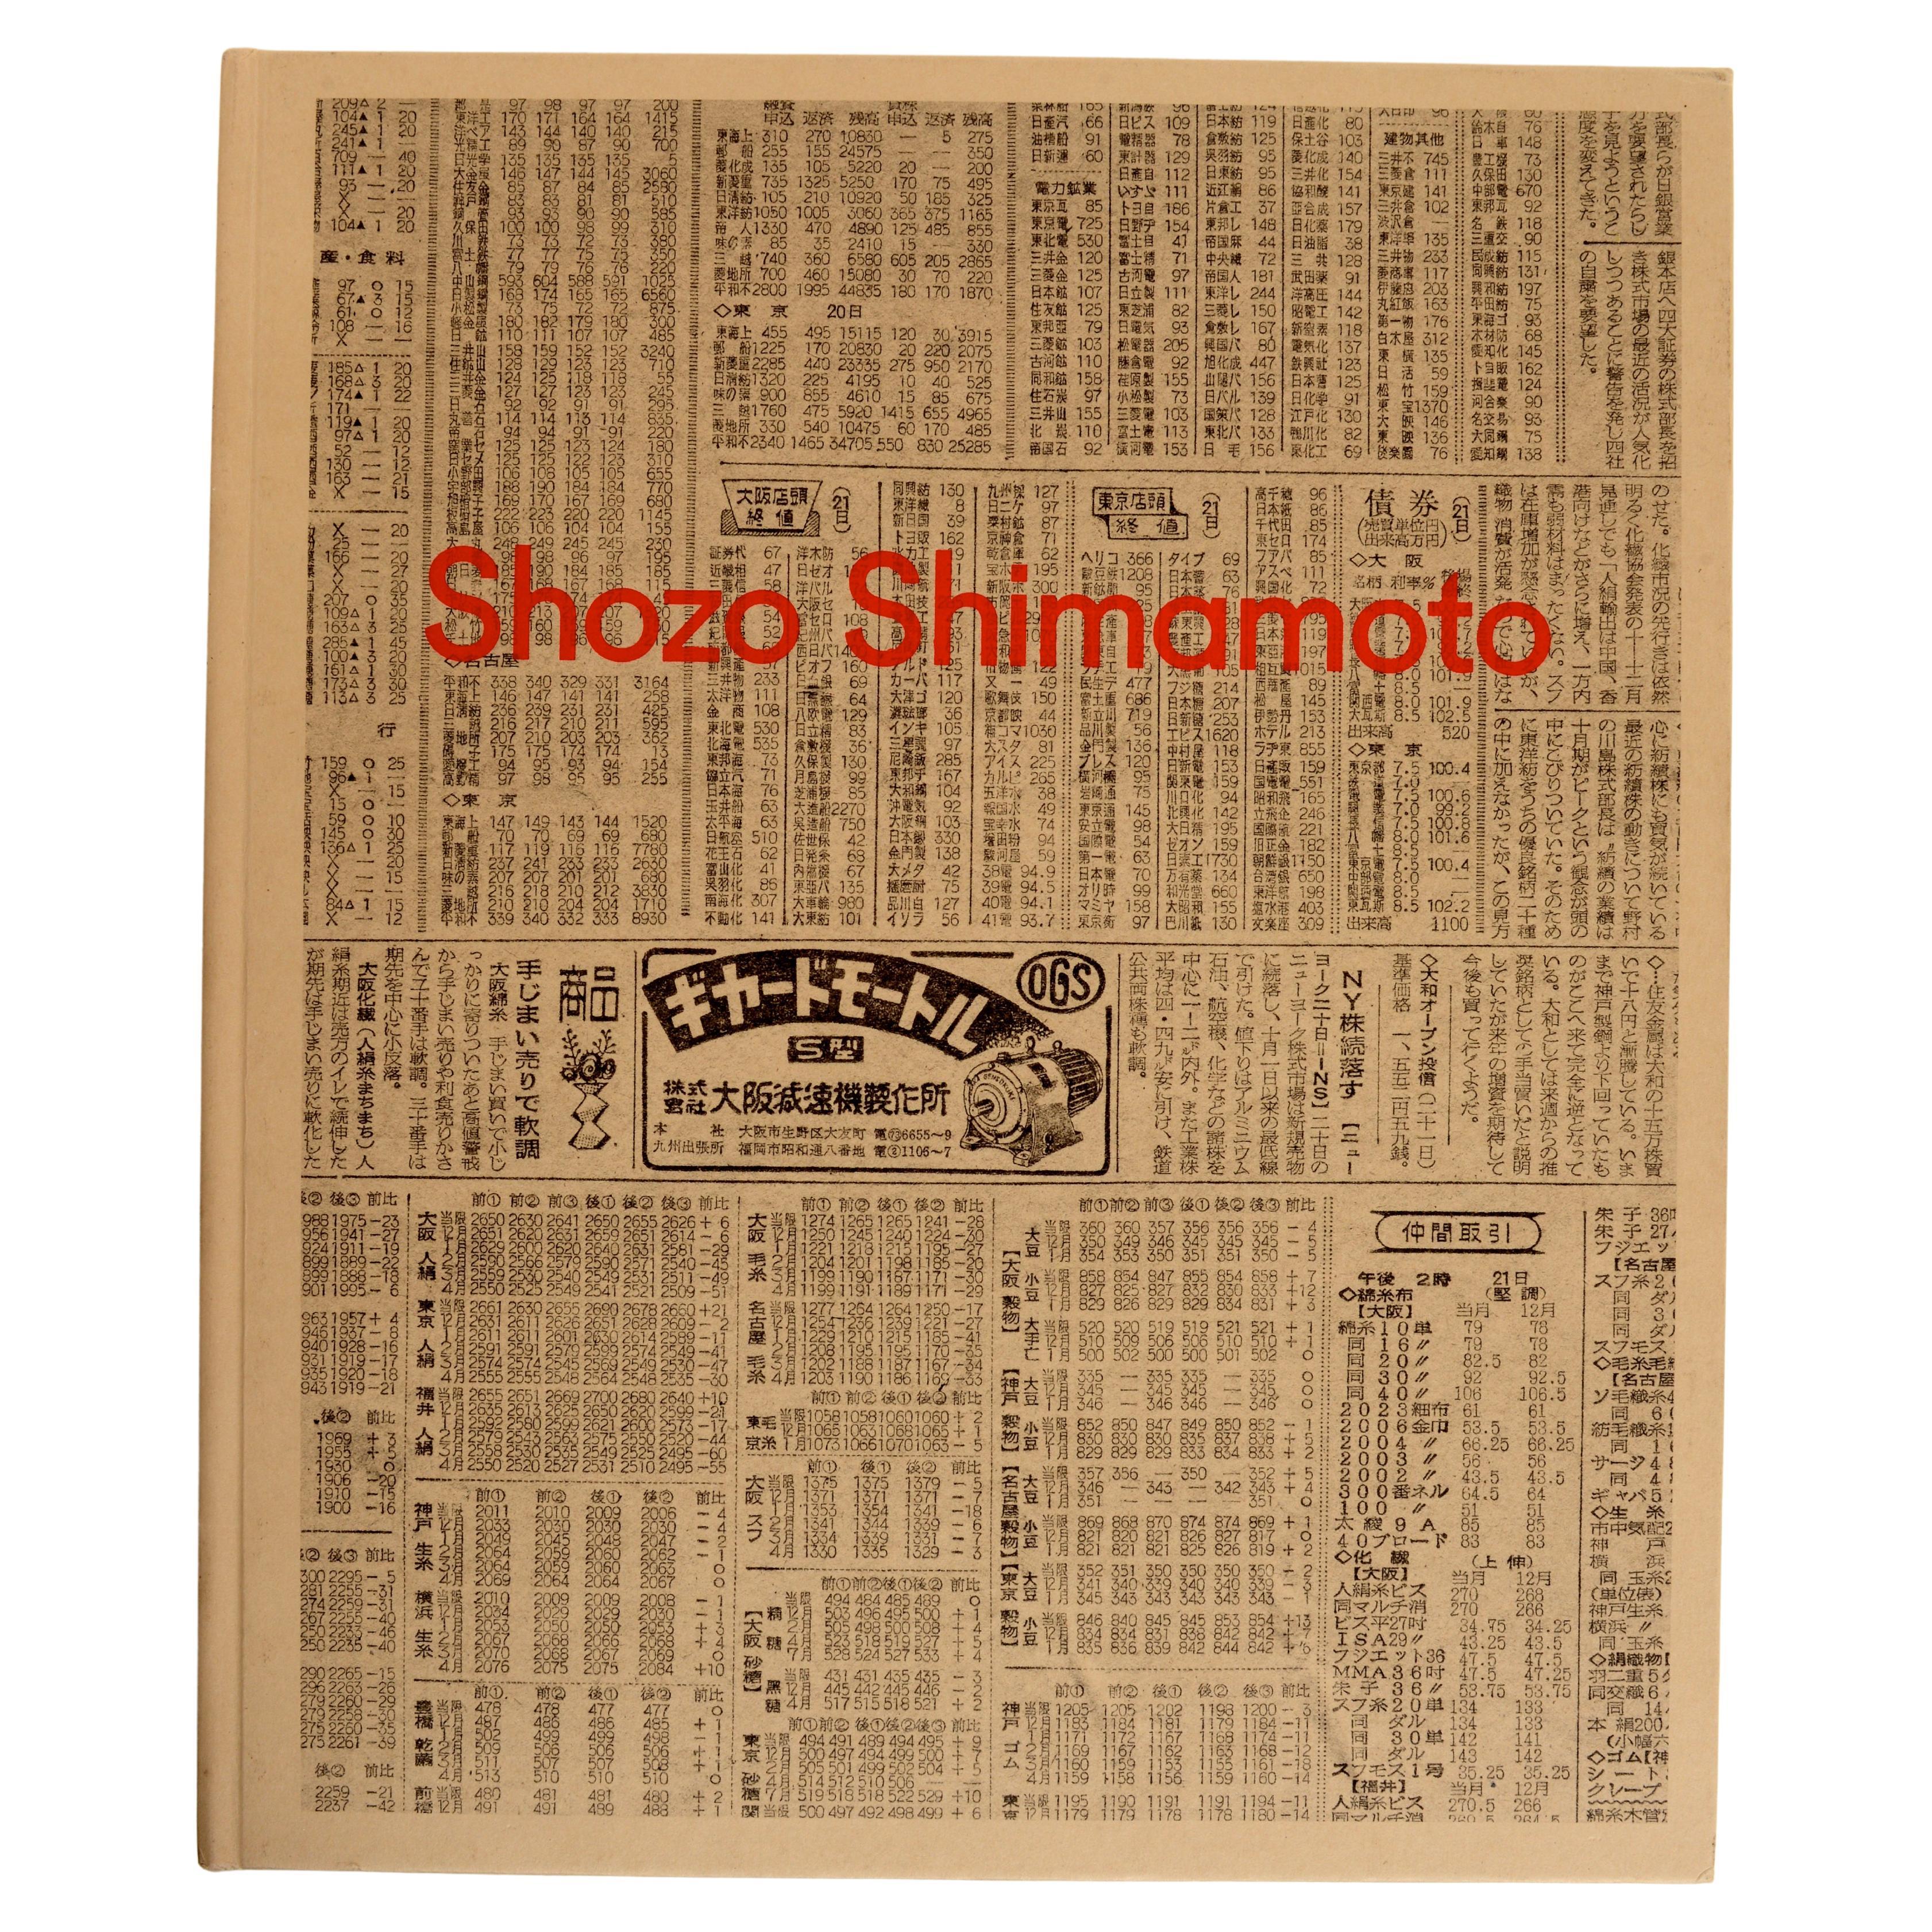 Shozo Shimamoto, by Axel Vervoordt Gallery, 1st Ed